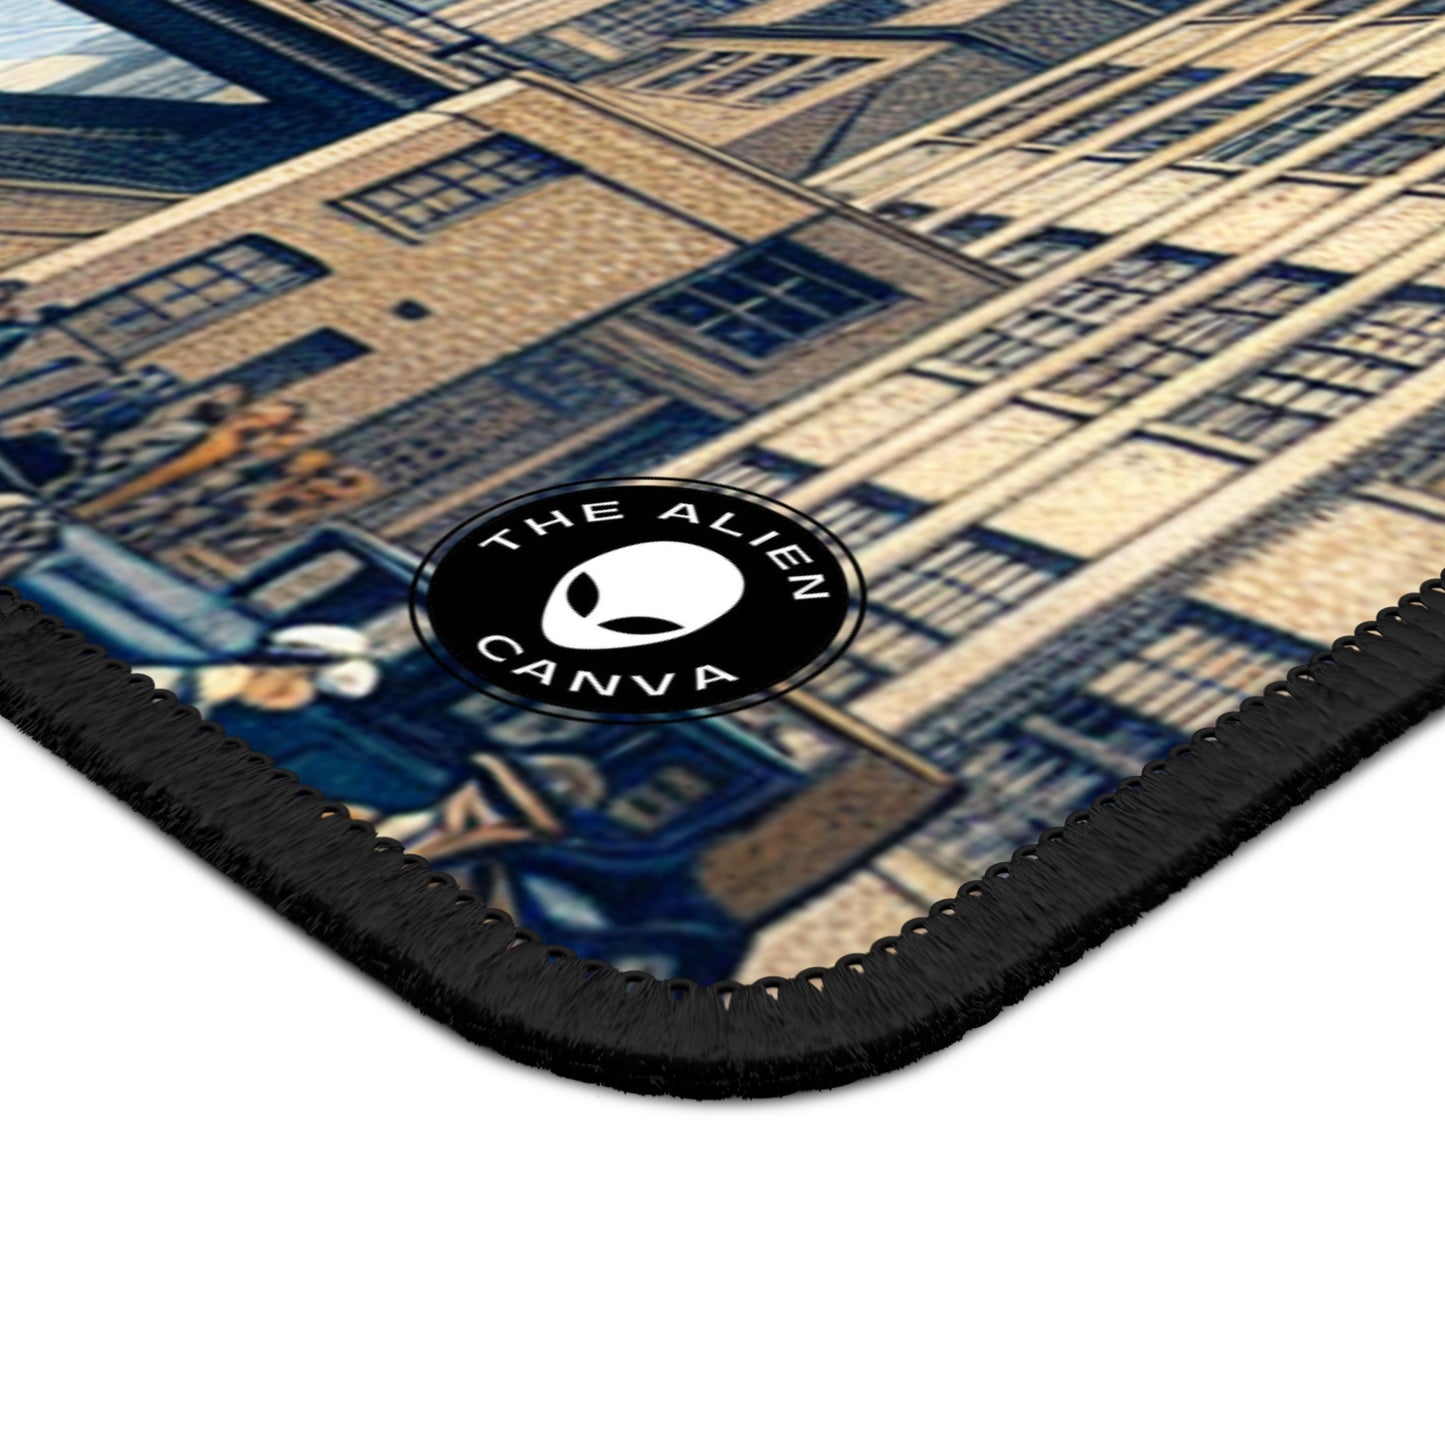 "Urban Geometry: A Modern Cityscape in New Objectivity" - The Alien Gaming Mouse Pad New Objectivity